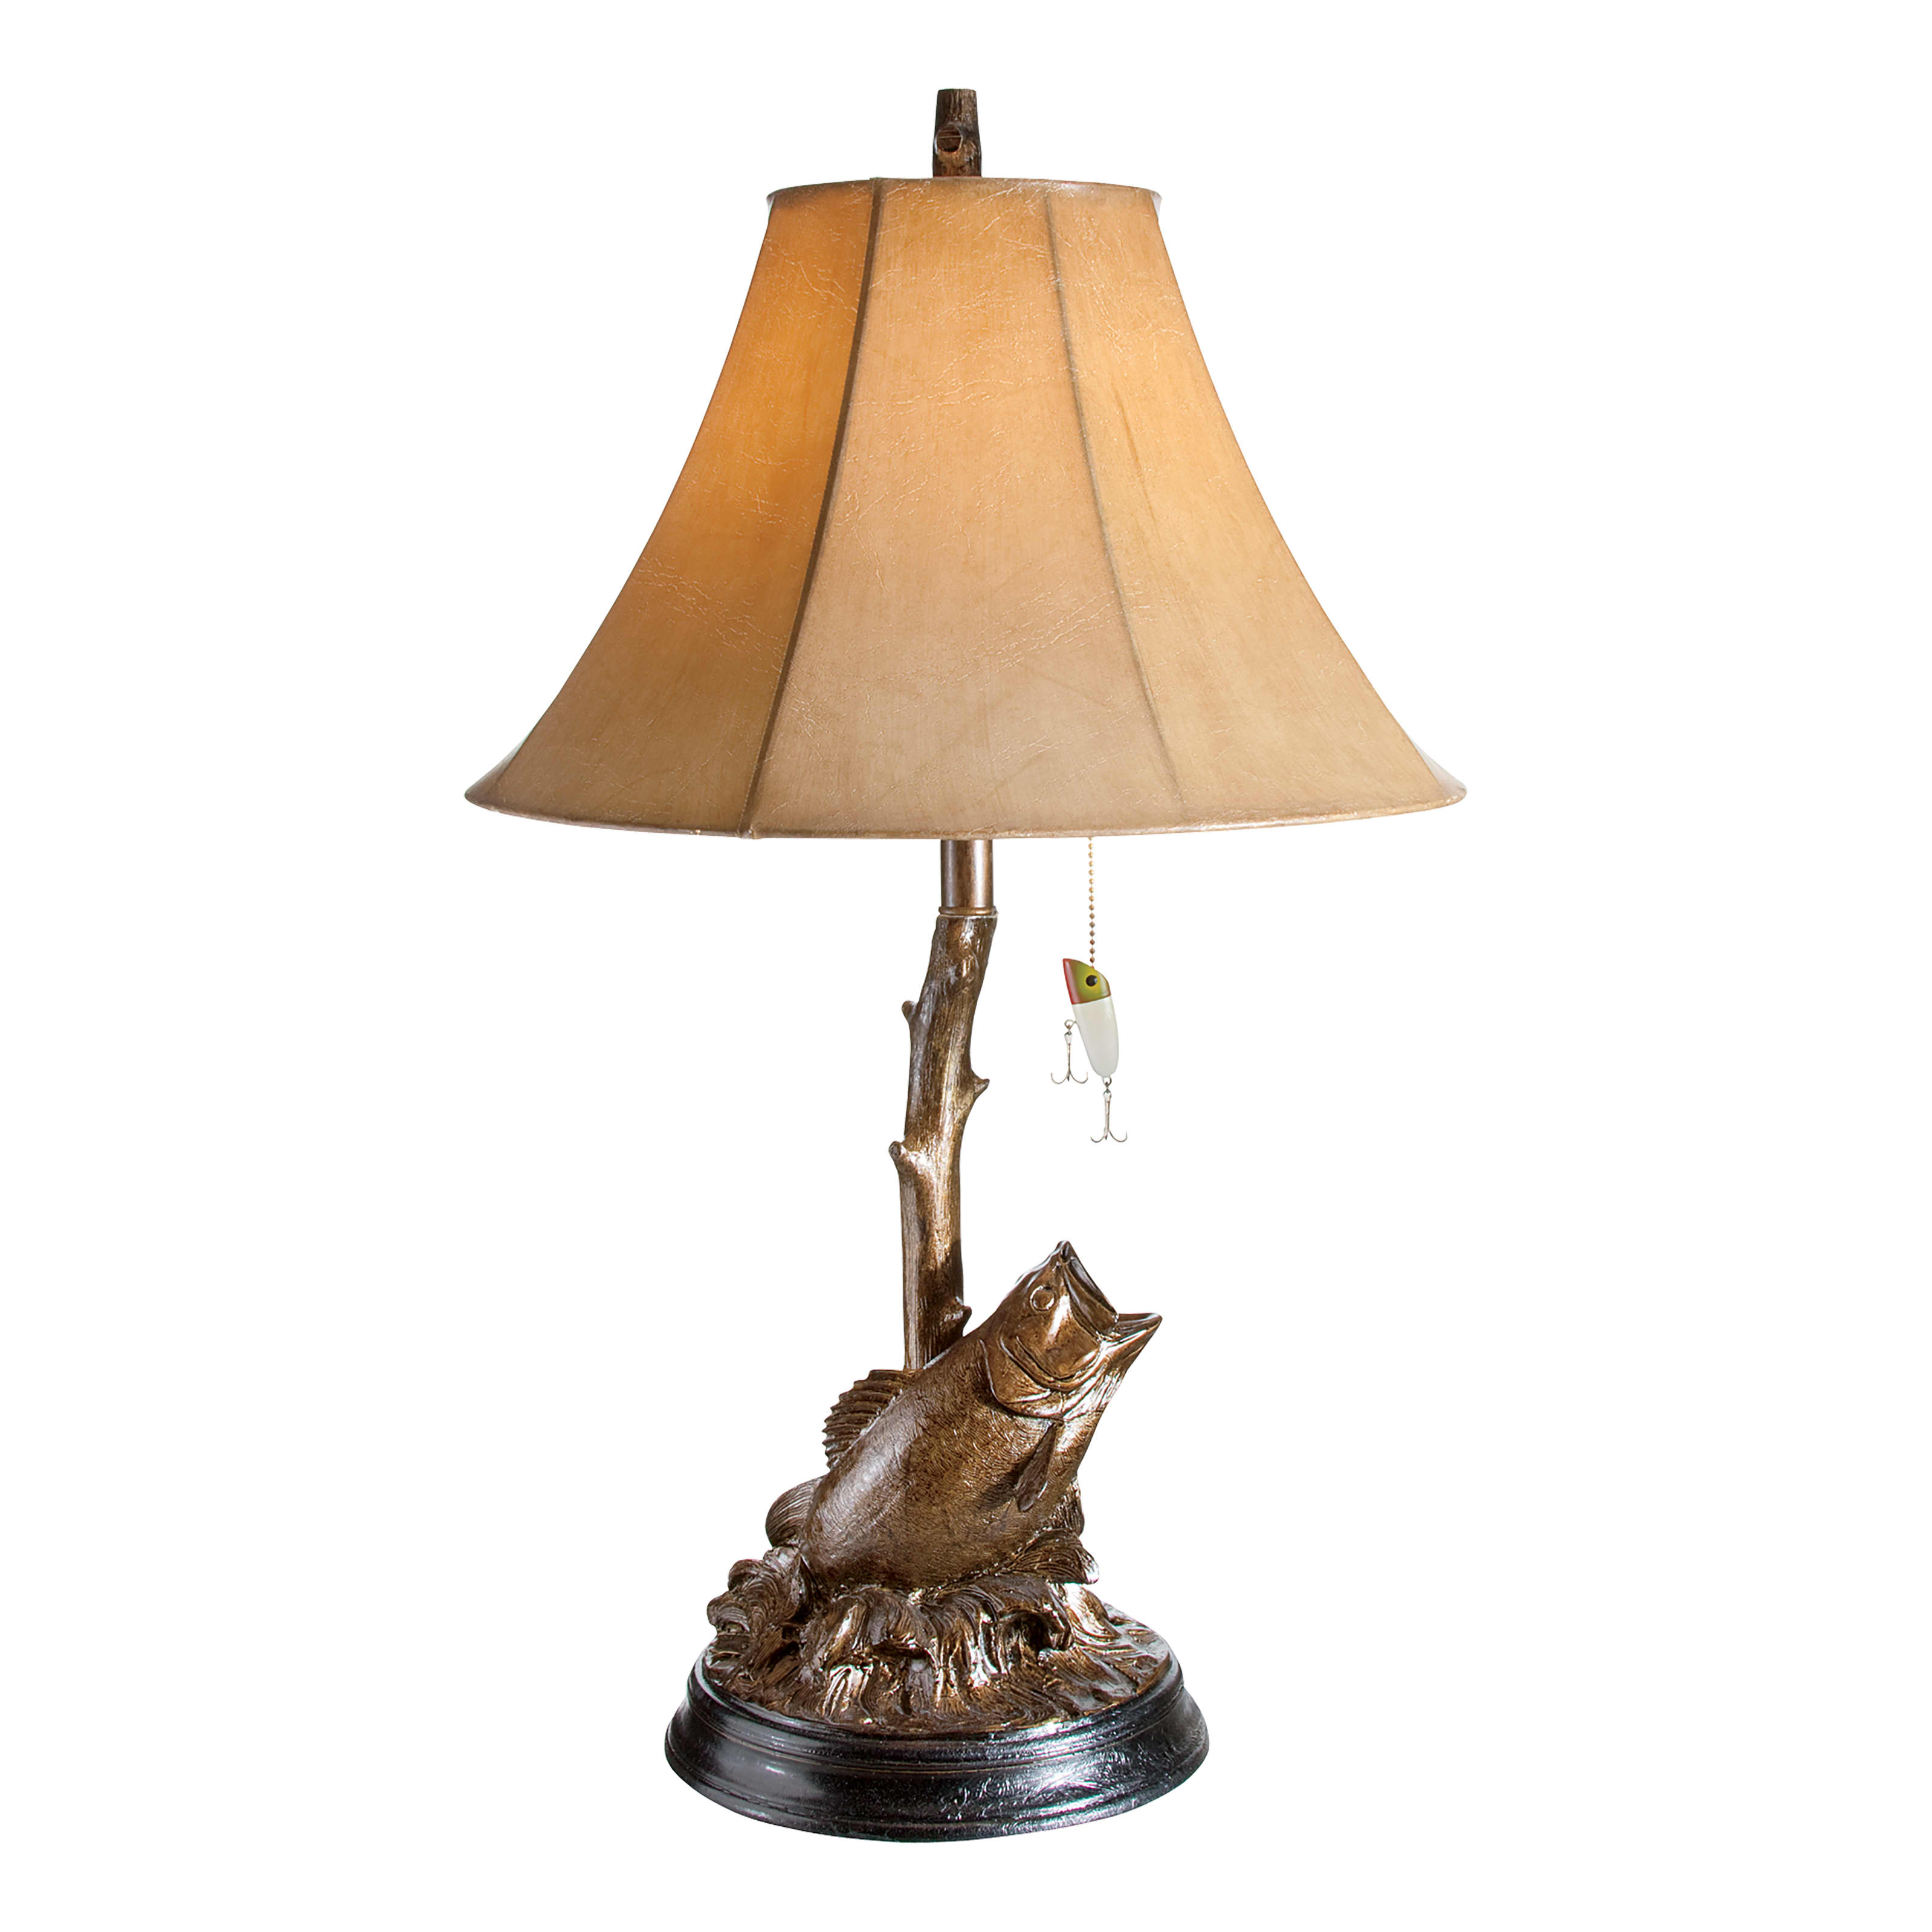 White River Bass Table Lamp - Cabelas - White RIVER - Table Lamps